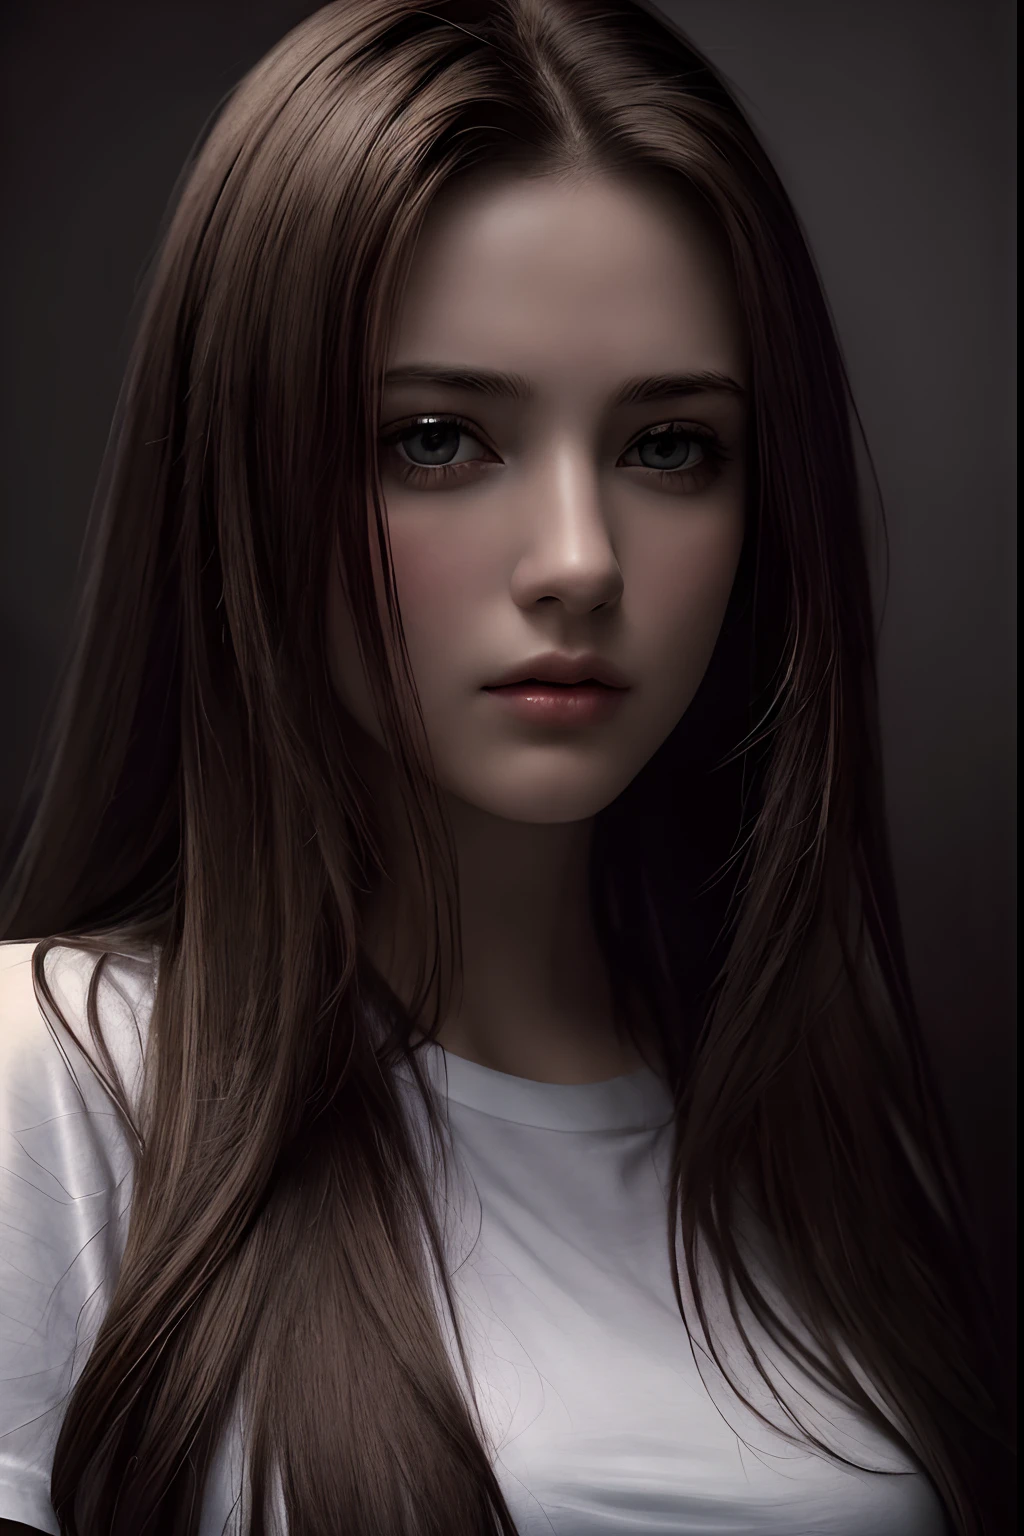 bestquality, masterpiece, ultra-high resolution, (photorealistic portrait:1.37), RAW photo, 1girls, long-haired, beautidul eyes,  Exquisite Face, Detailed eyes and face, t-shirt, Dynamic lighting, In the dark, Deep Shadows, Low key, cowboy shot